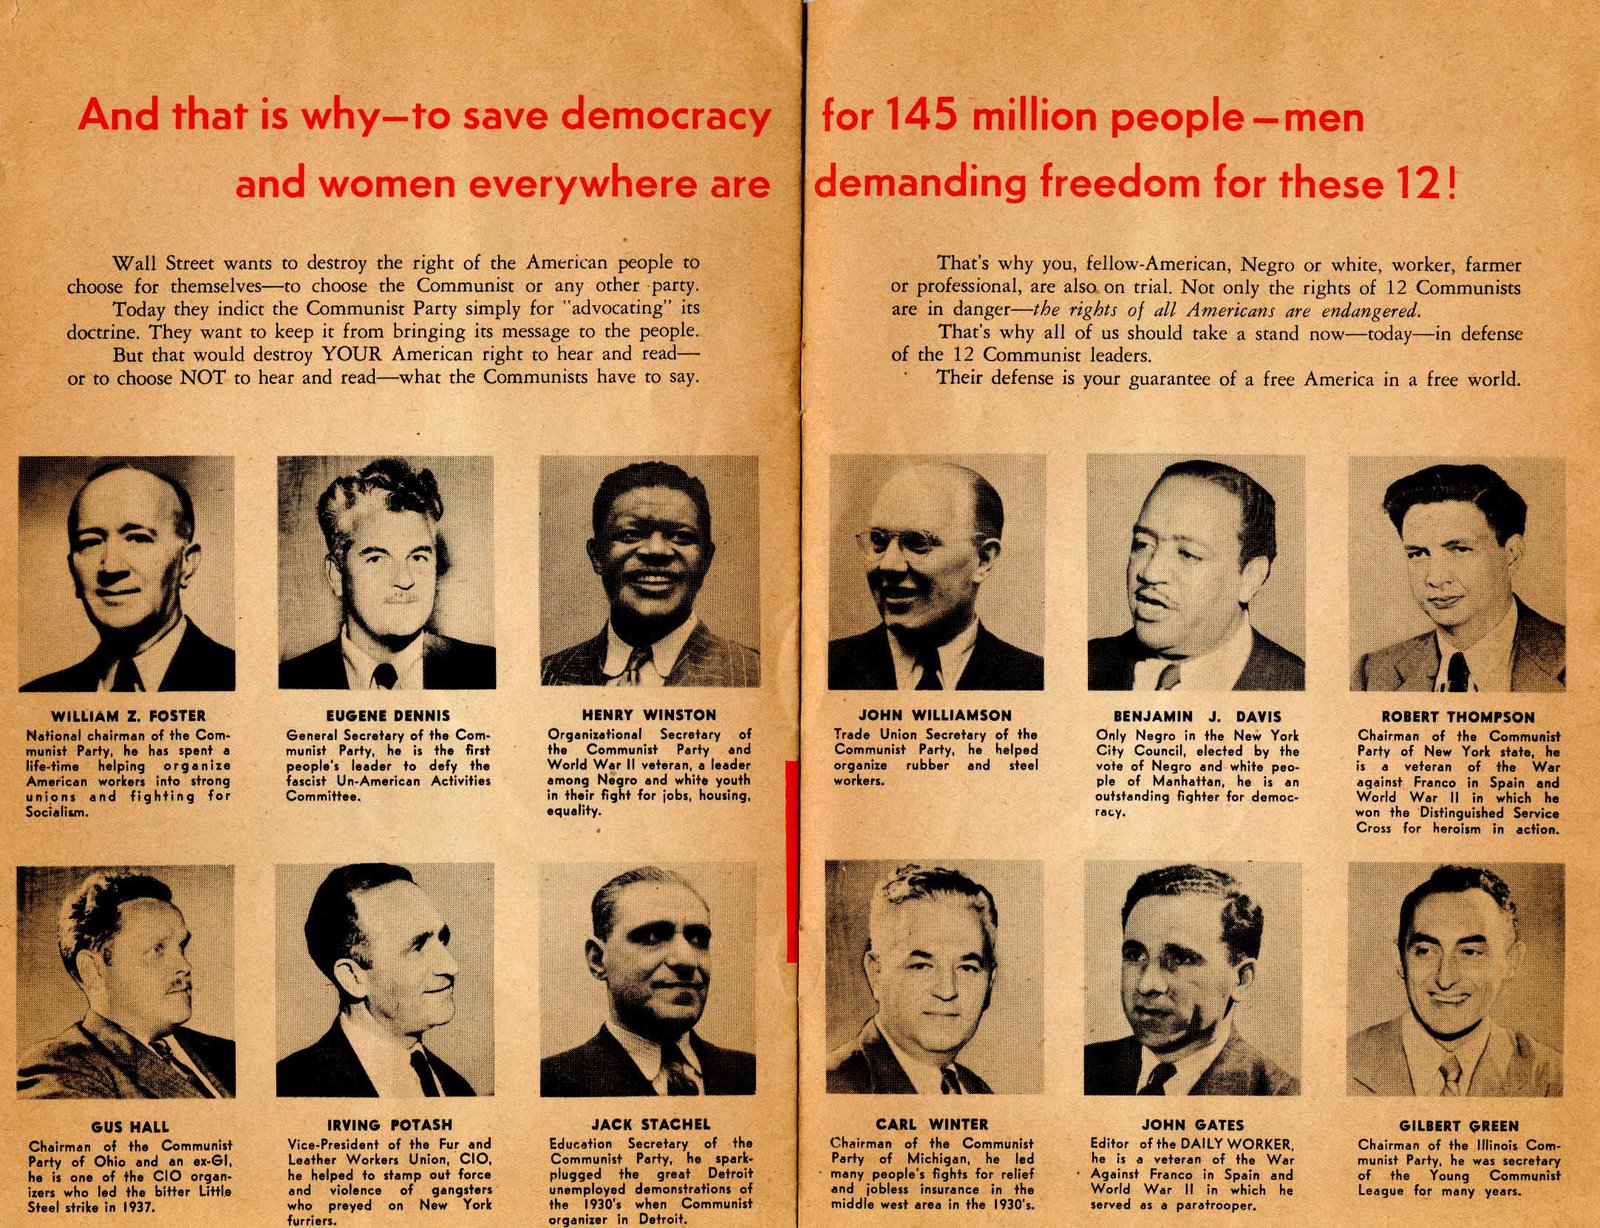 Pamphlet urging support for demanding freedom for 12 Americans facing indictment for being members of the Communist Party